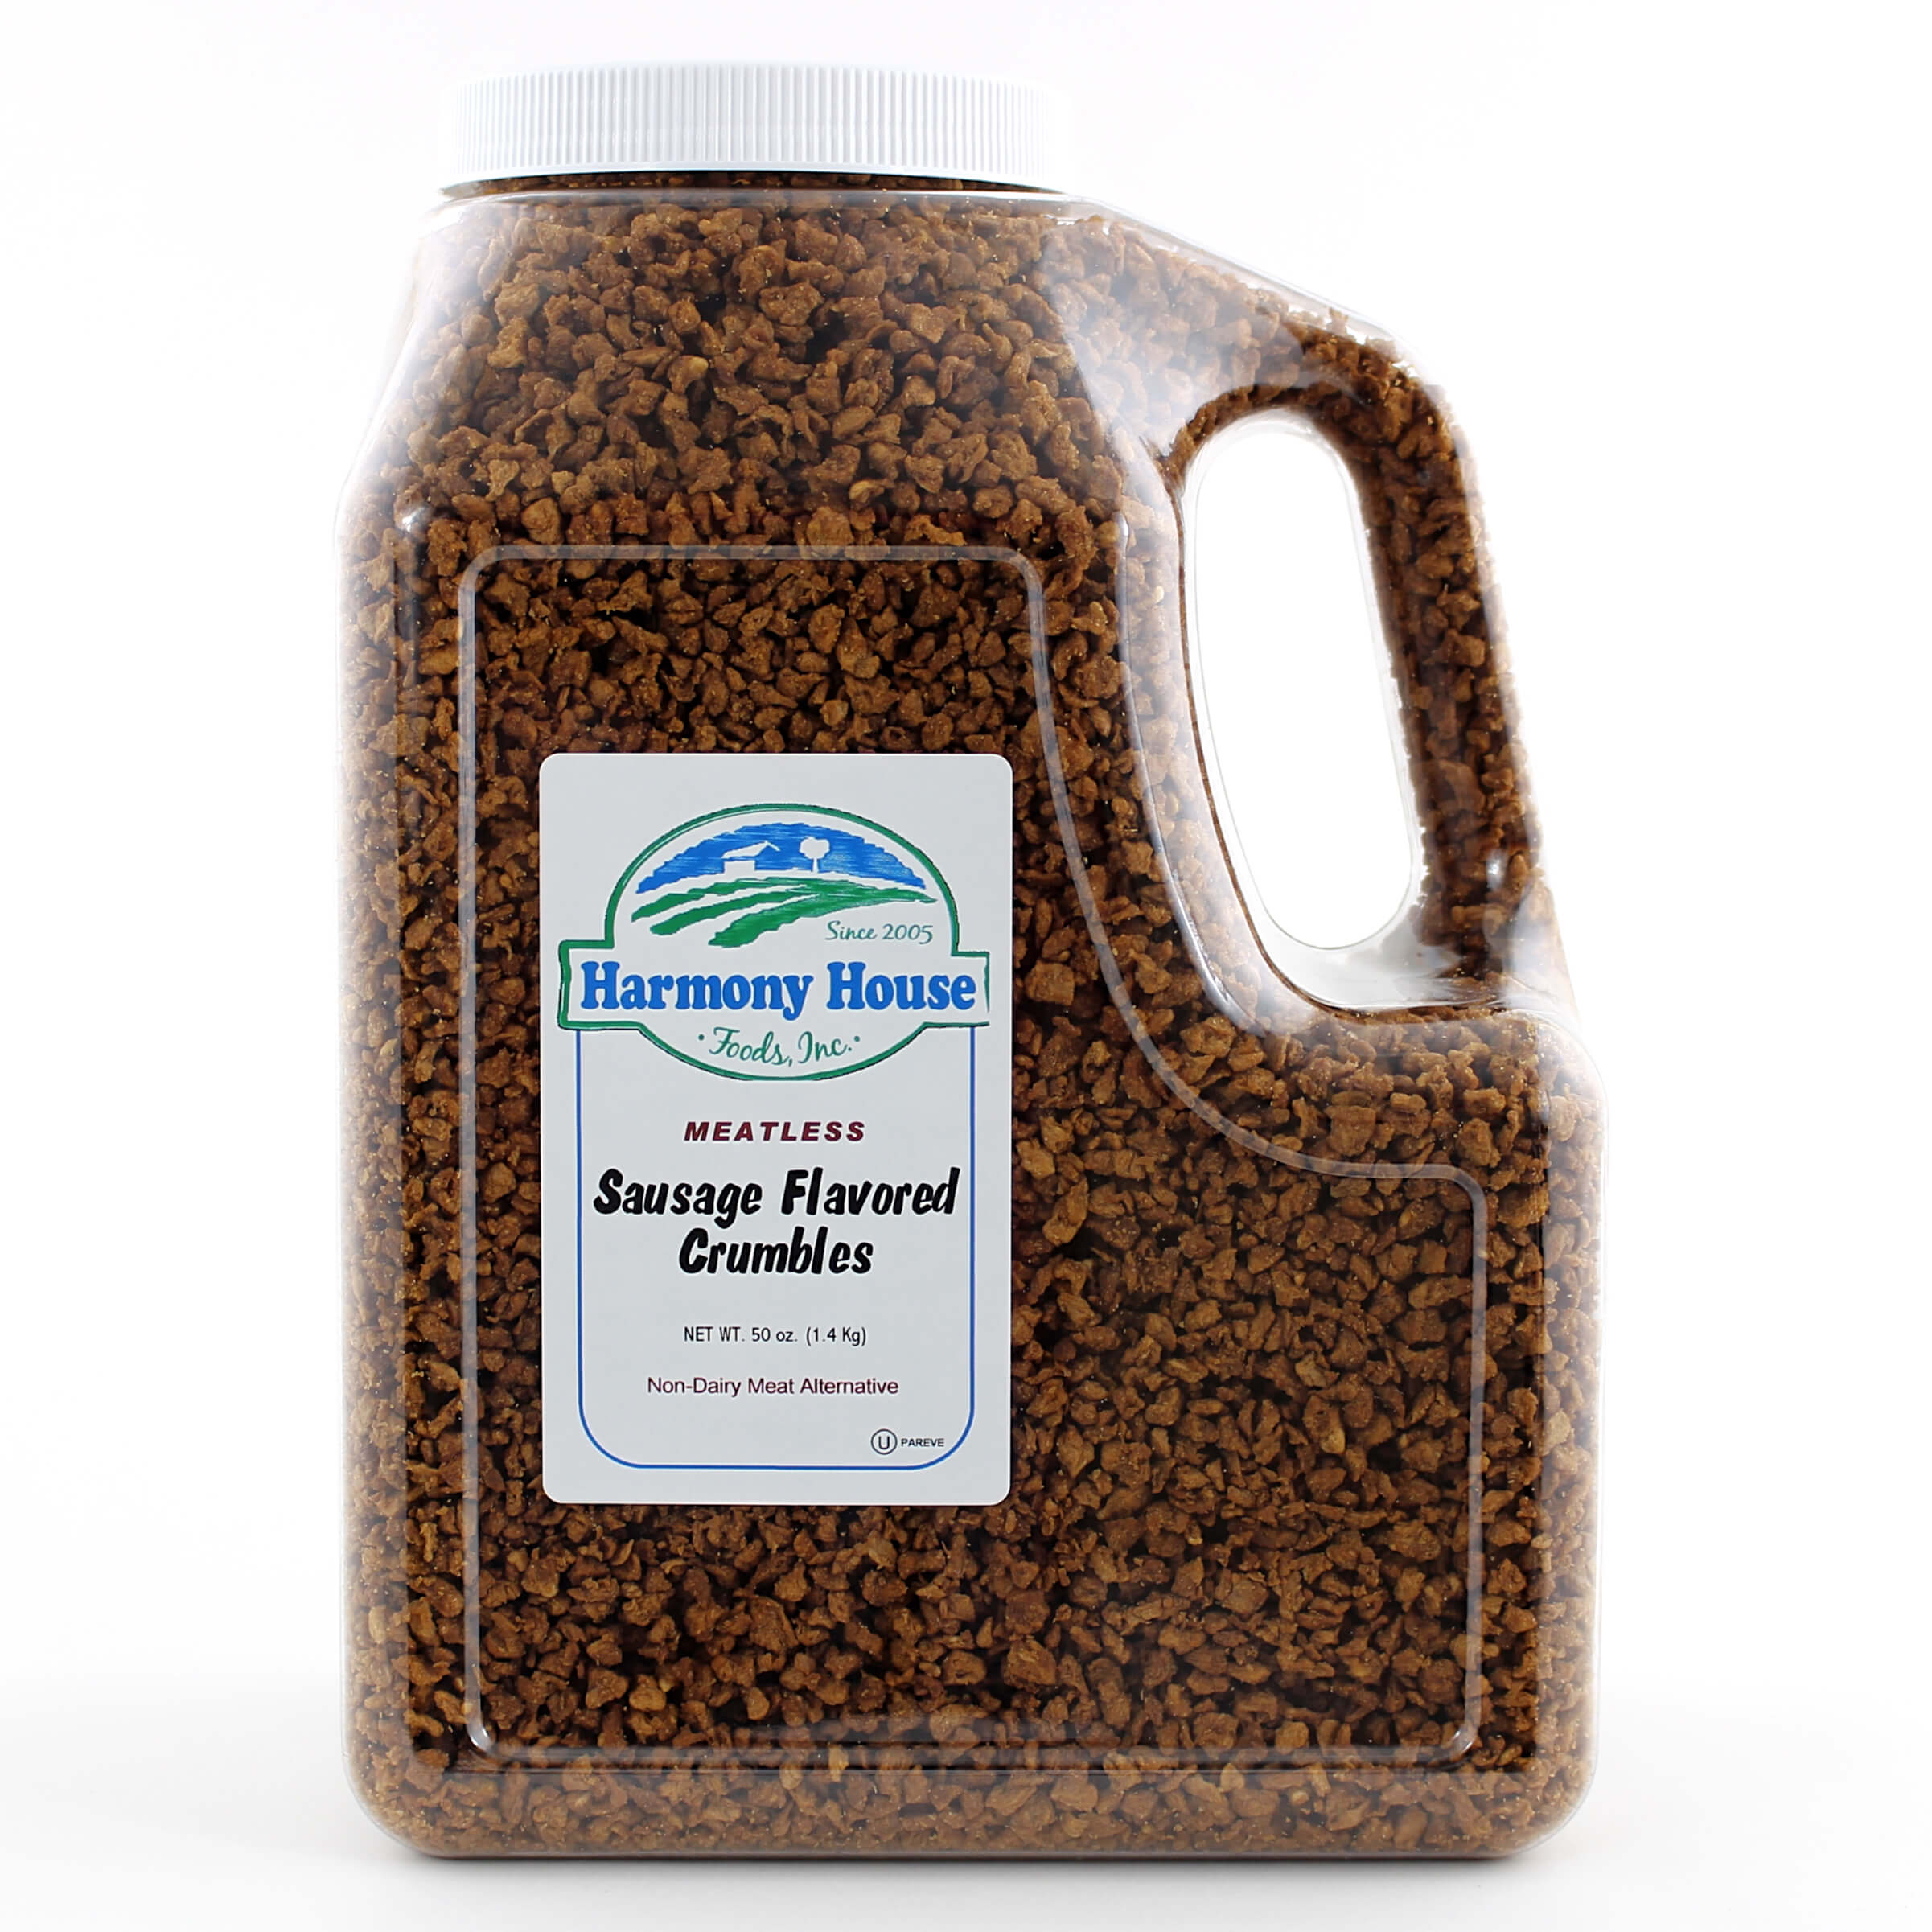 A jug of Harmony House Sausage Flavored Crumbles on a white background.